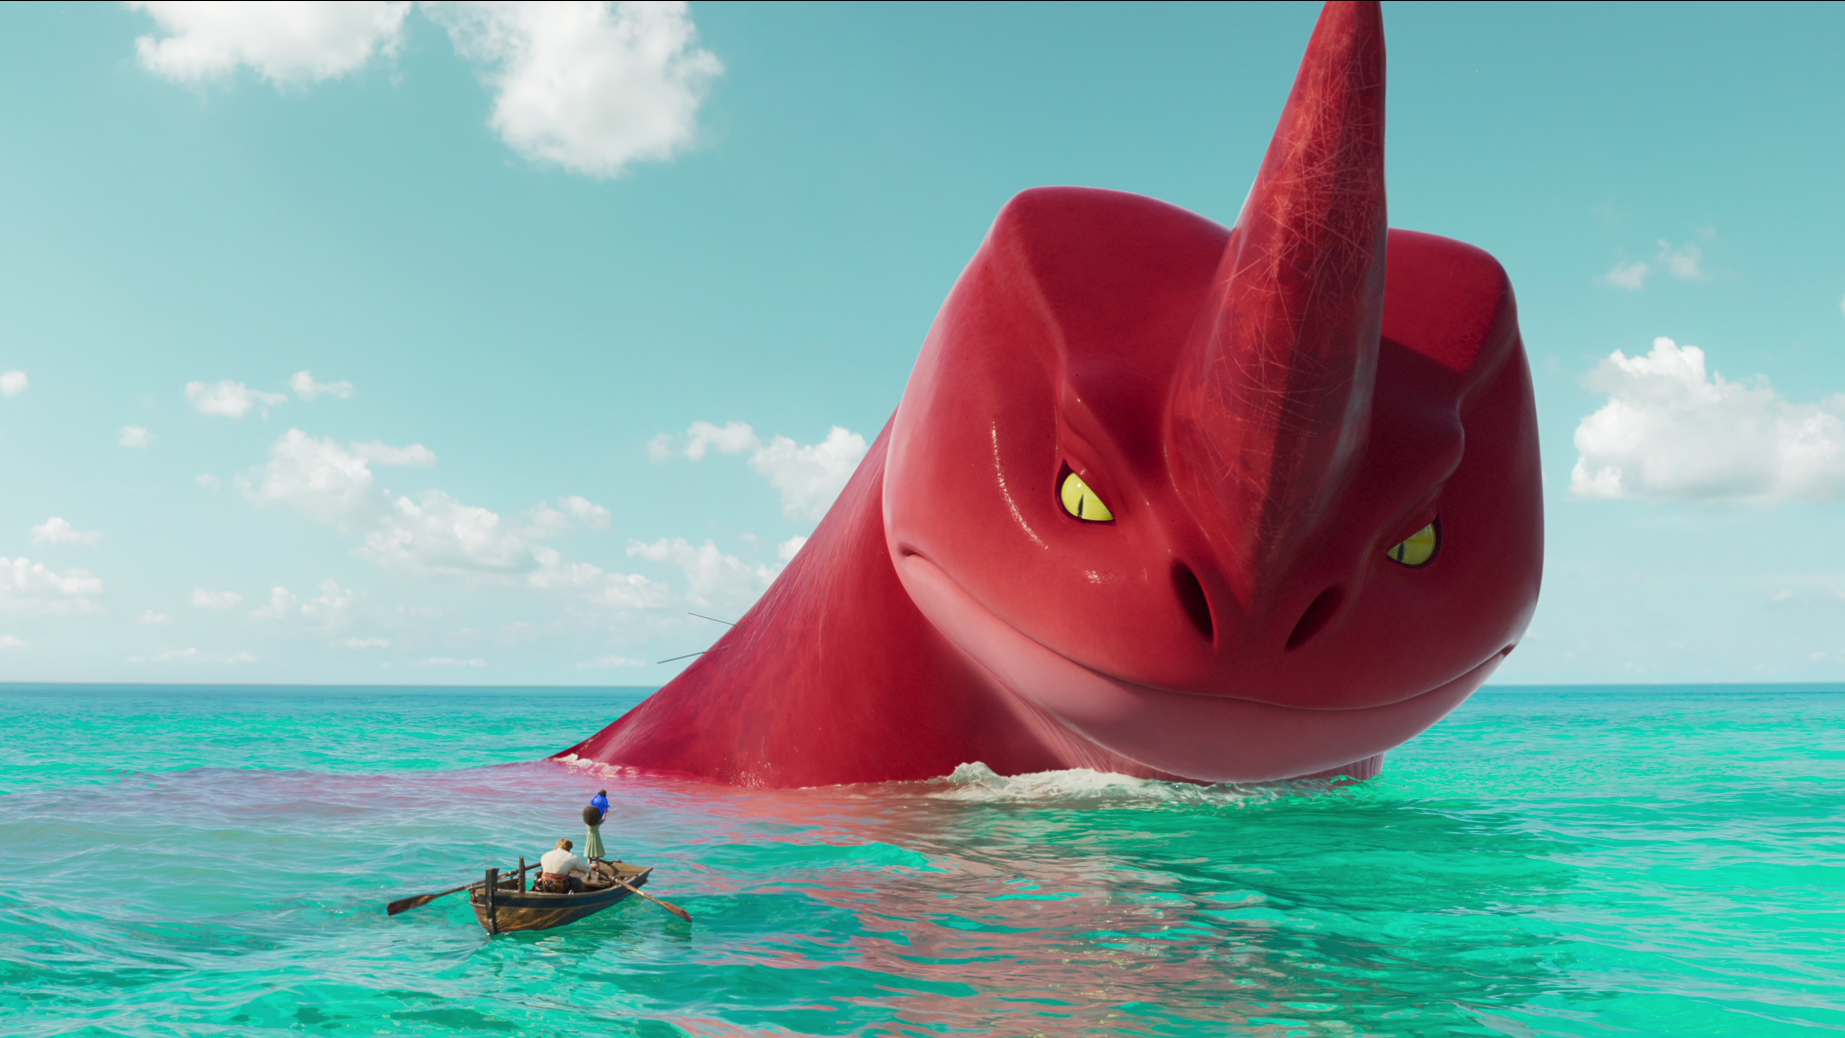 Still from Netflix’s The Sea Beast © 2022 Sony Pictures Imageworks